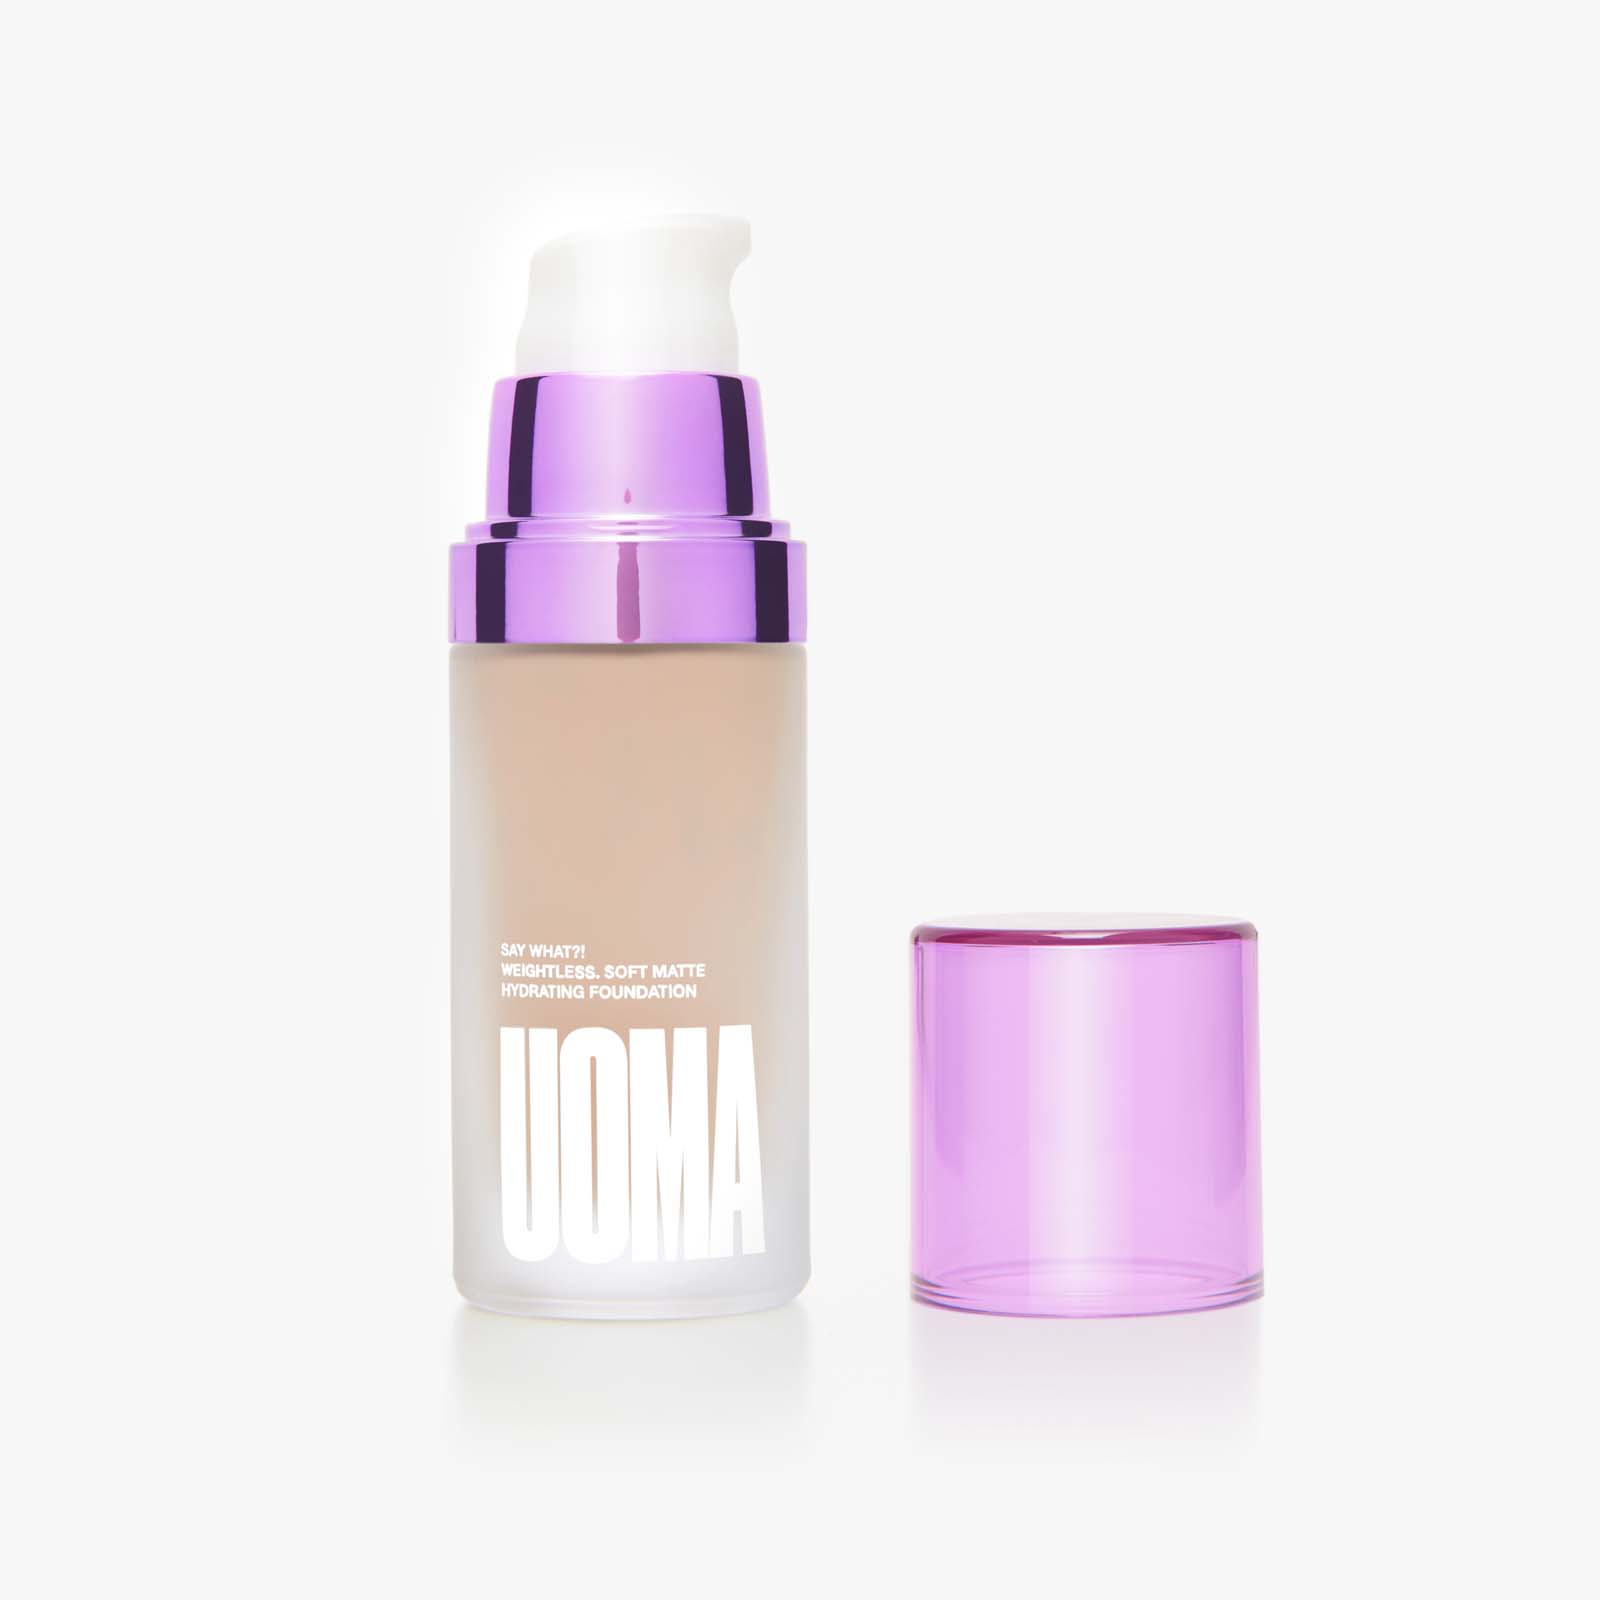 Uoma Beauty Say What?! Weightless Soft Matte Hydrating Foundation 30Ml White Pearl T1W